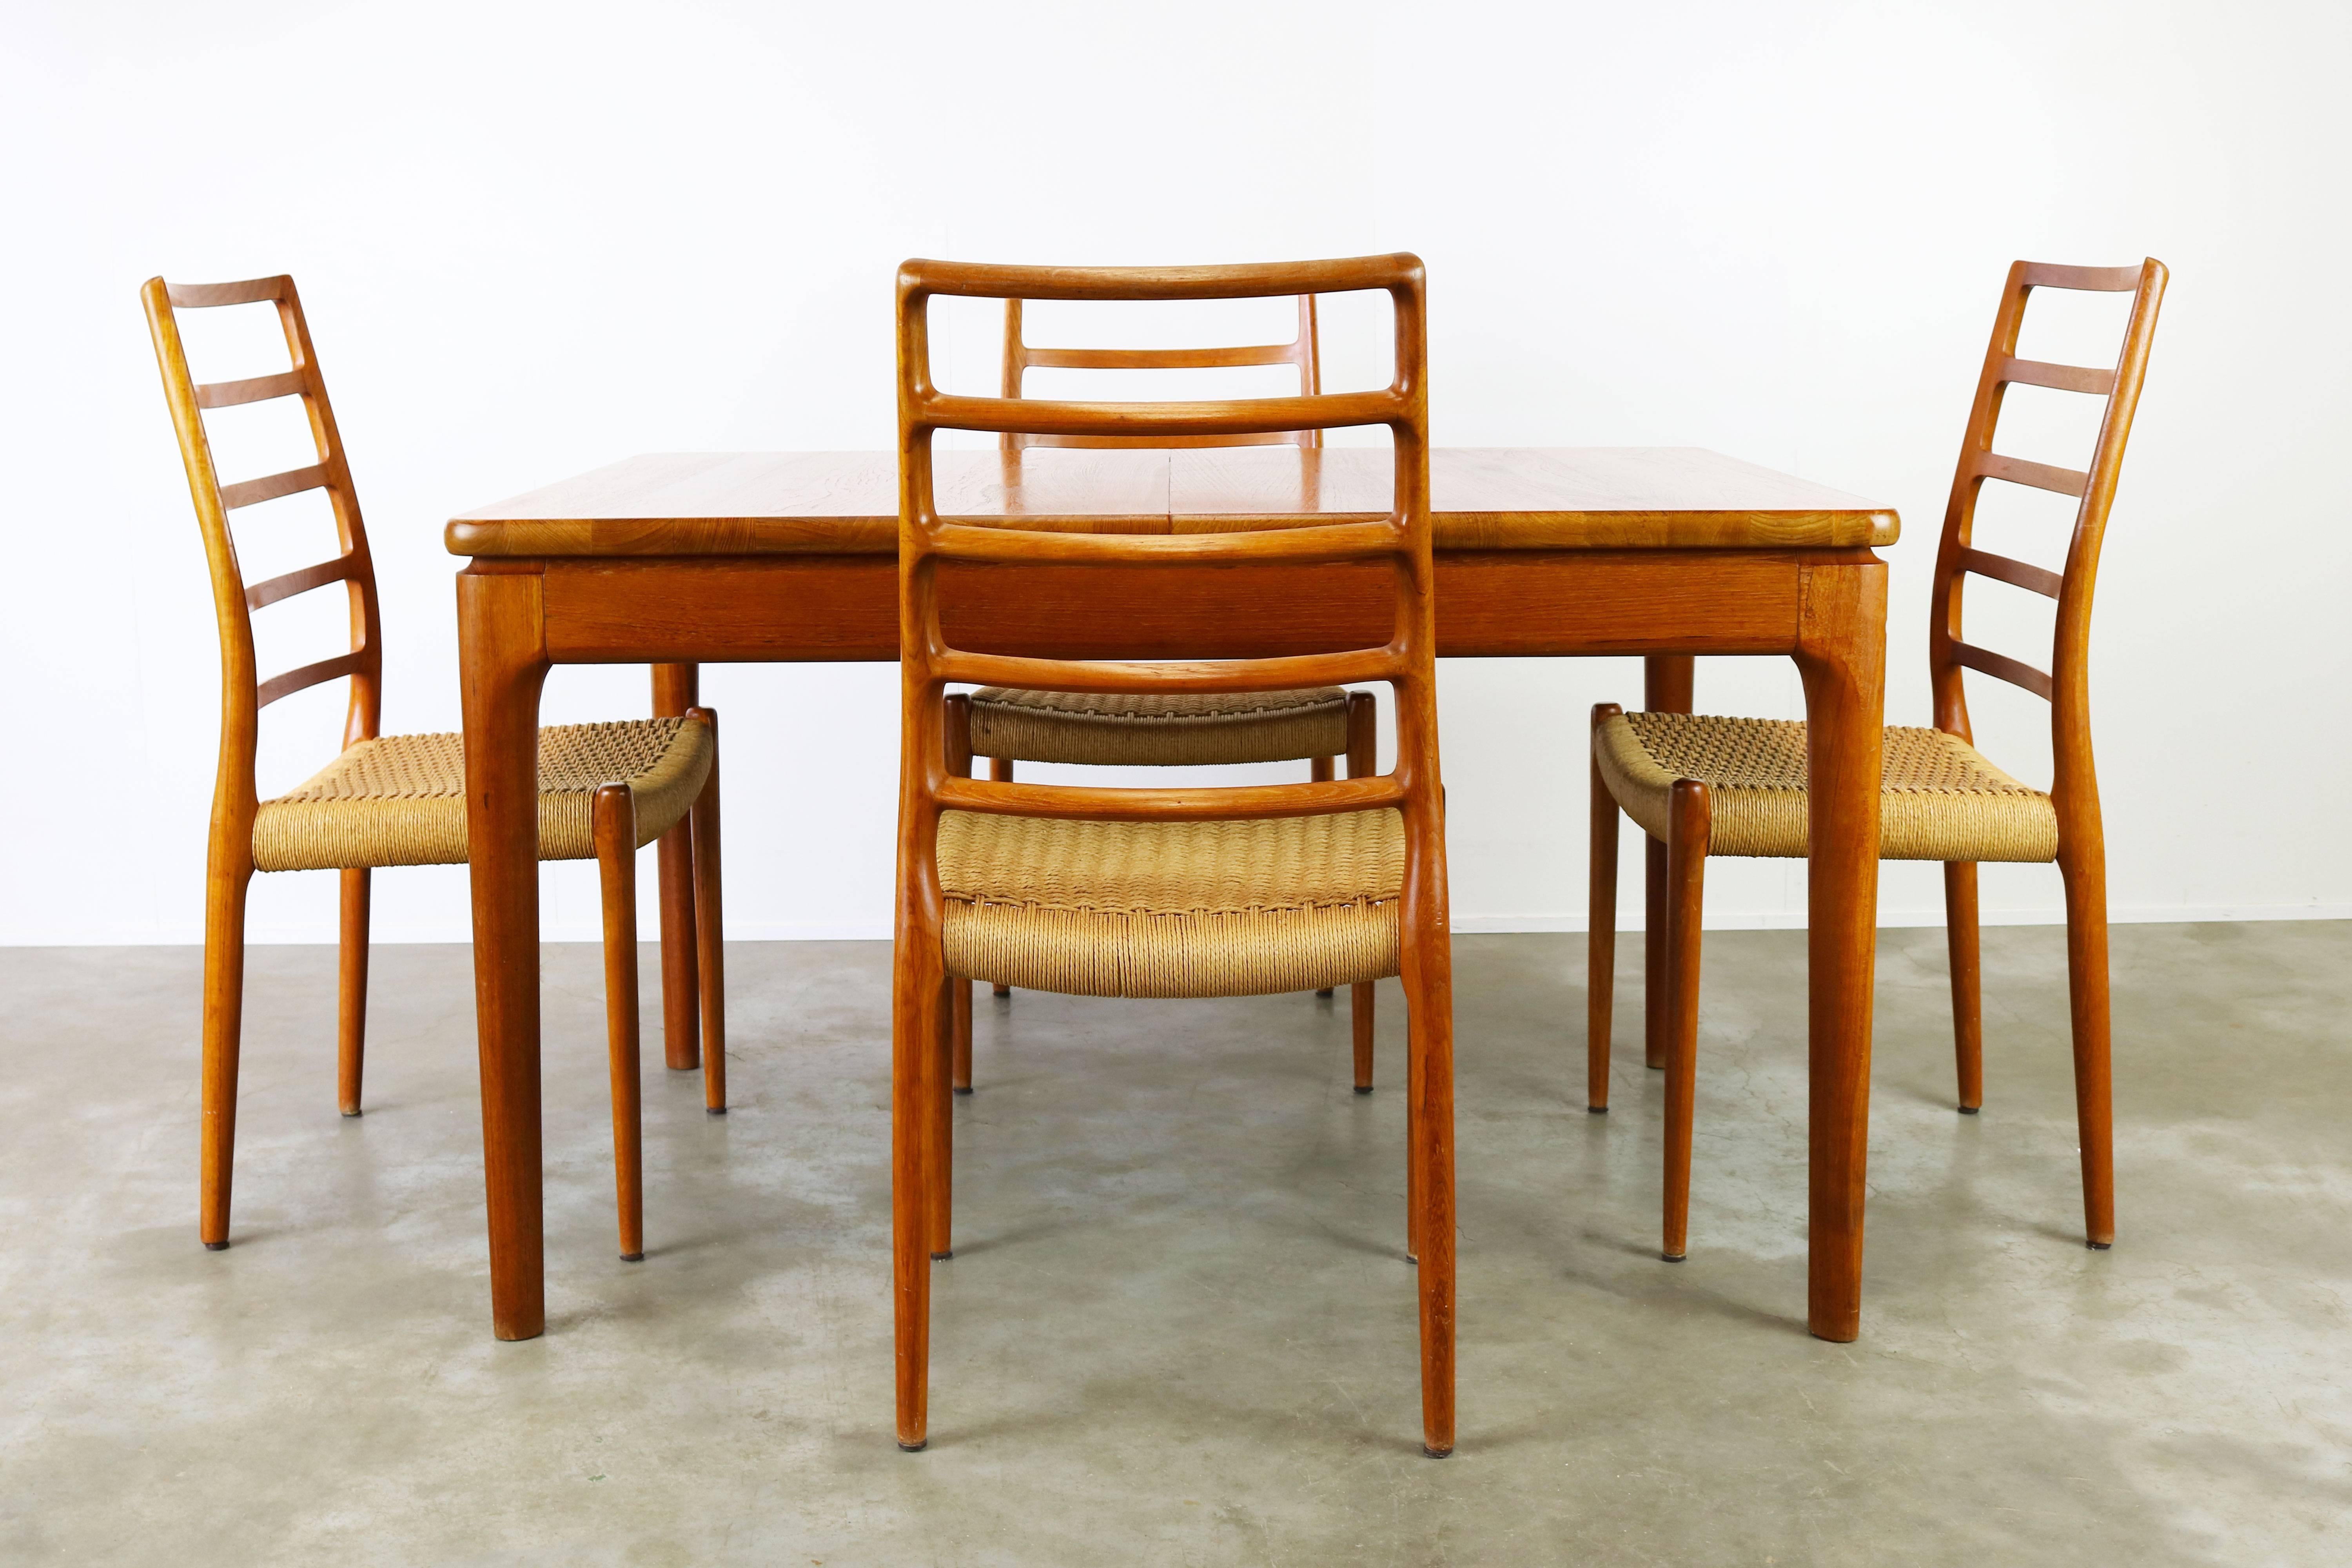 Magnificent Danish design dining room set in solid teak designed by Niels Otto Moller & Glostrup. The set consists of four very rare model 82 ''Highback'' chairs designed my Niels Otto Moller and produced by J.L. Mollers Mobelfarbik in solid teak